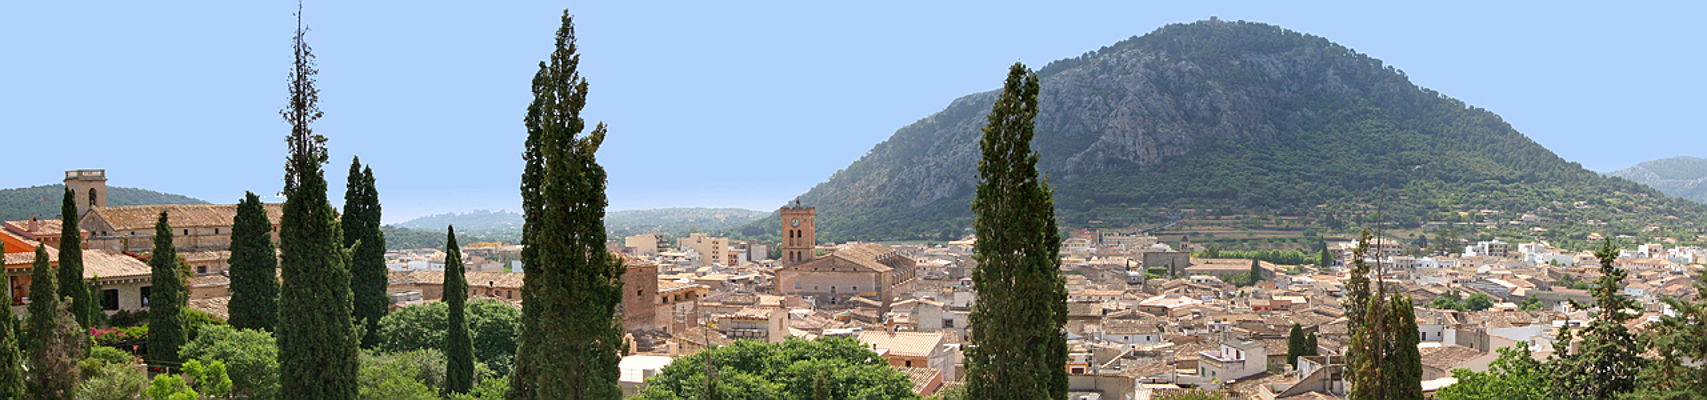  Pollensa
- Find your perfect home in one of the best traditional towns of Mallorca North